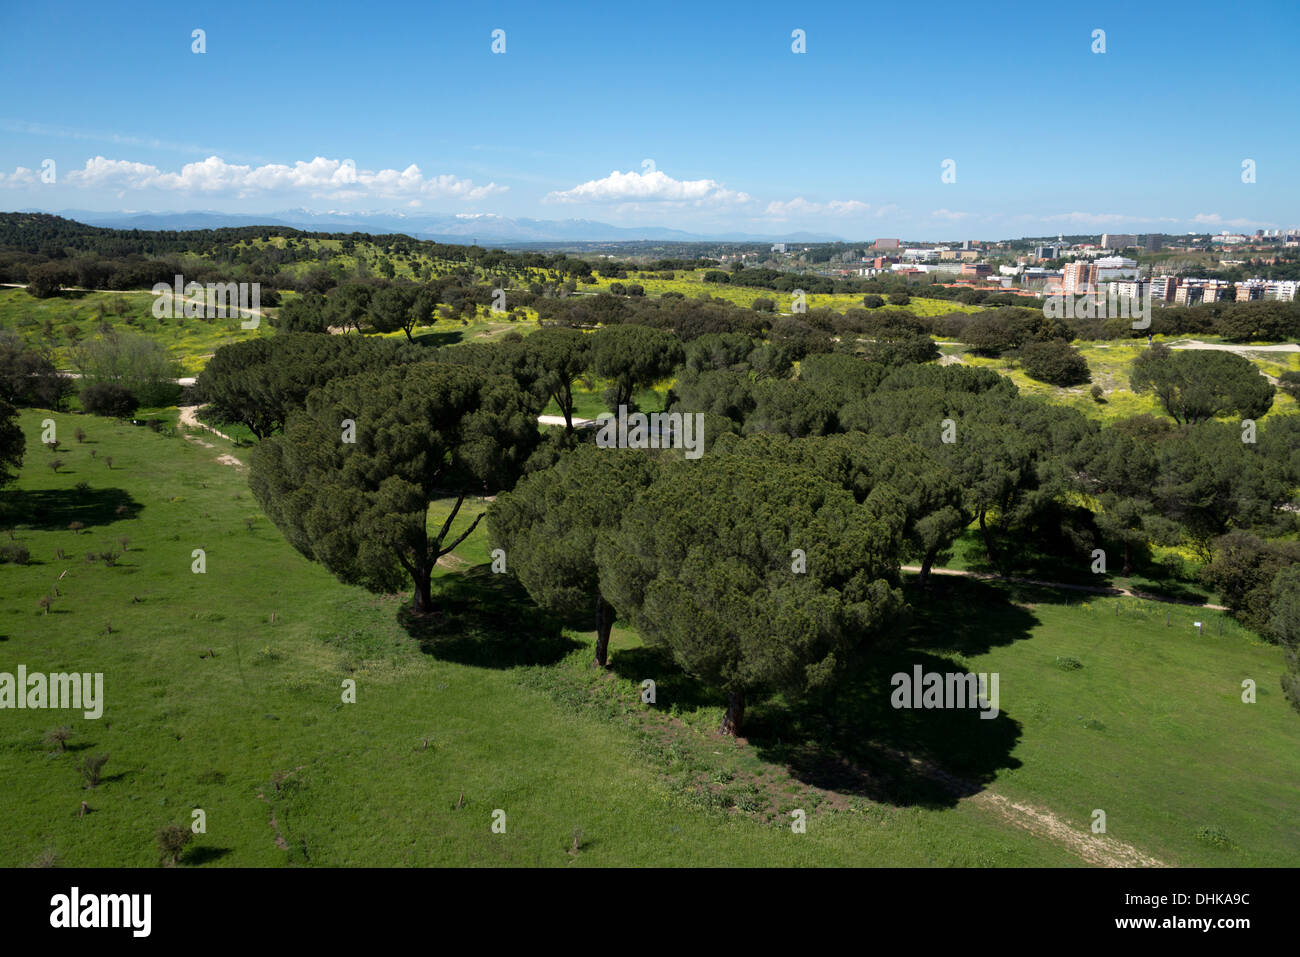 View Of Casa De Campo From The Teleferico Madrid Spain Stock Photo Alamy